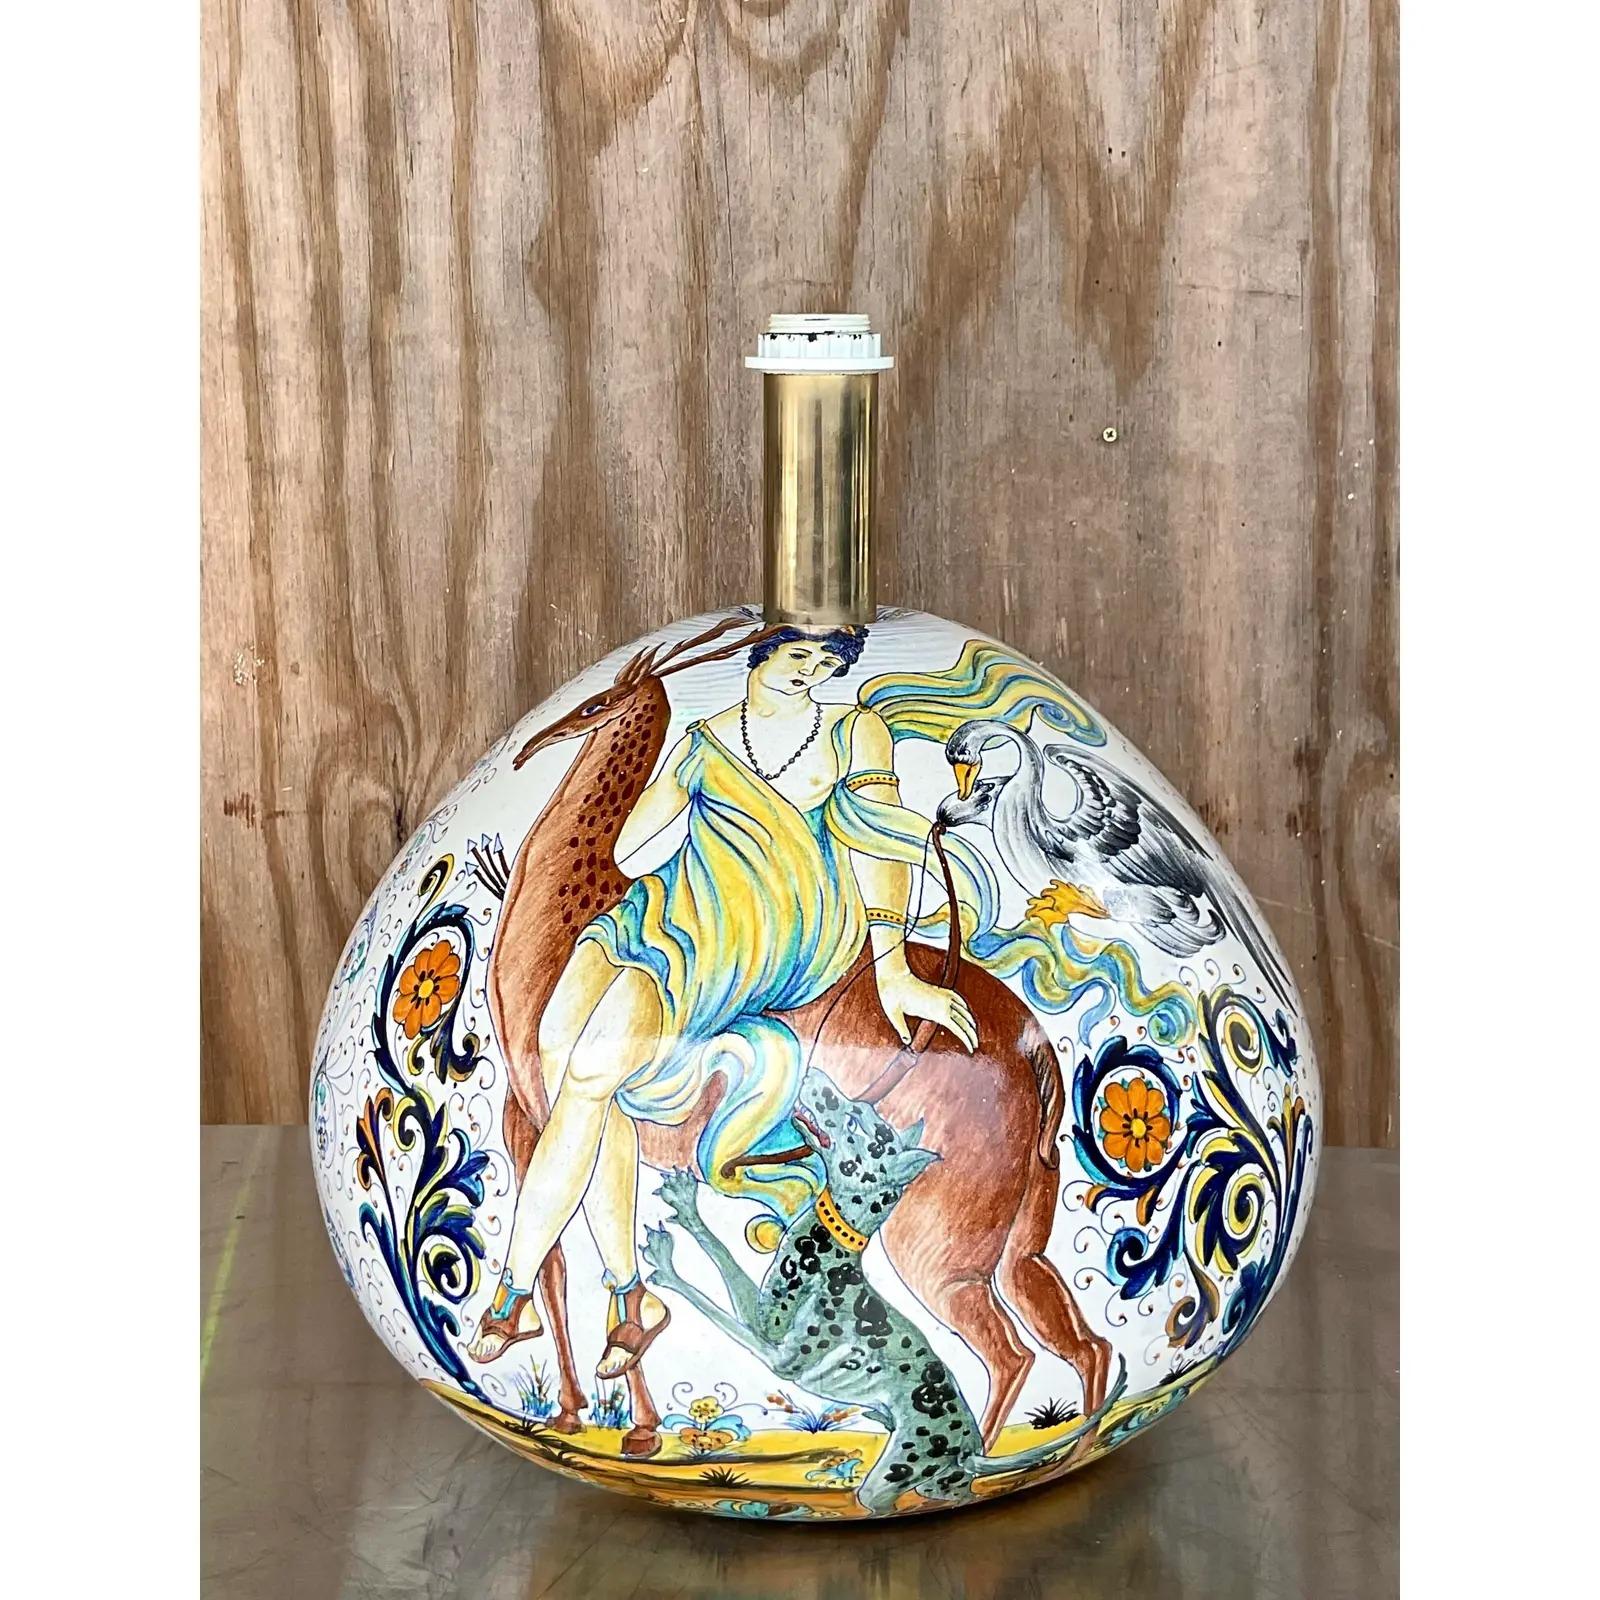 Gorgeous vintage large glazed ceramic lamp. Hand painted composition of a beautiful woman surrounded by her forest friends. Bright clear colors. Acquired from a Palm Beach estate.